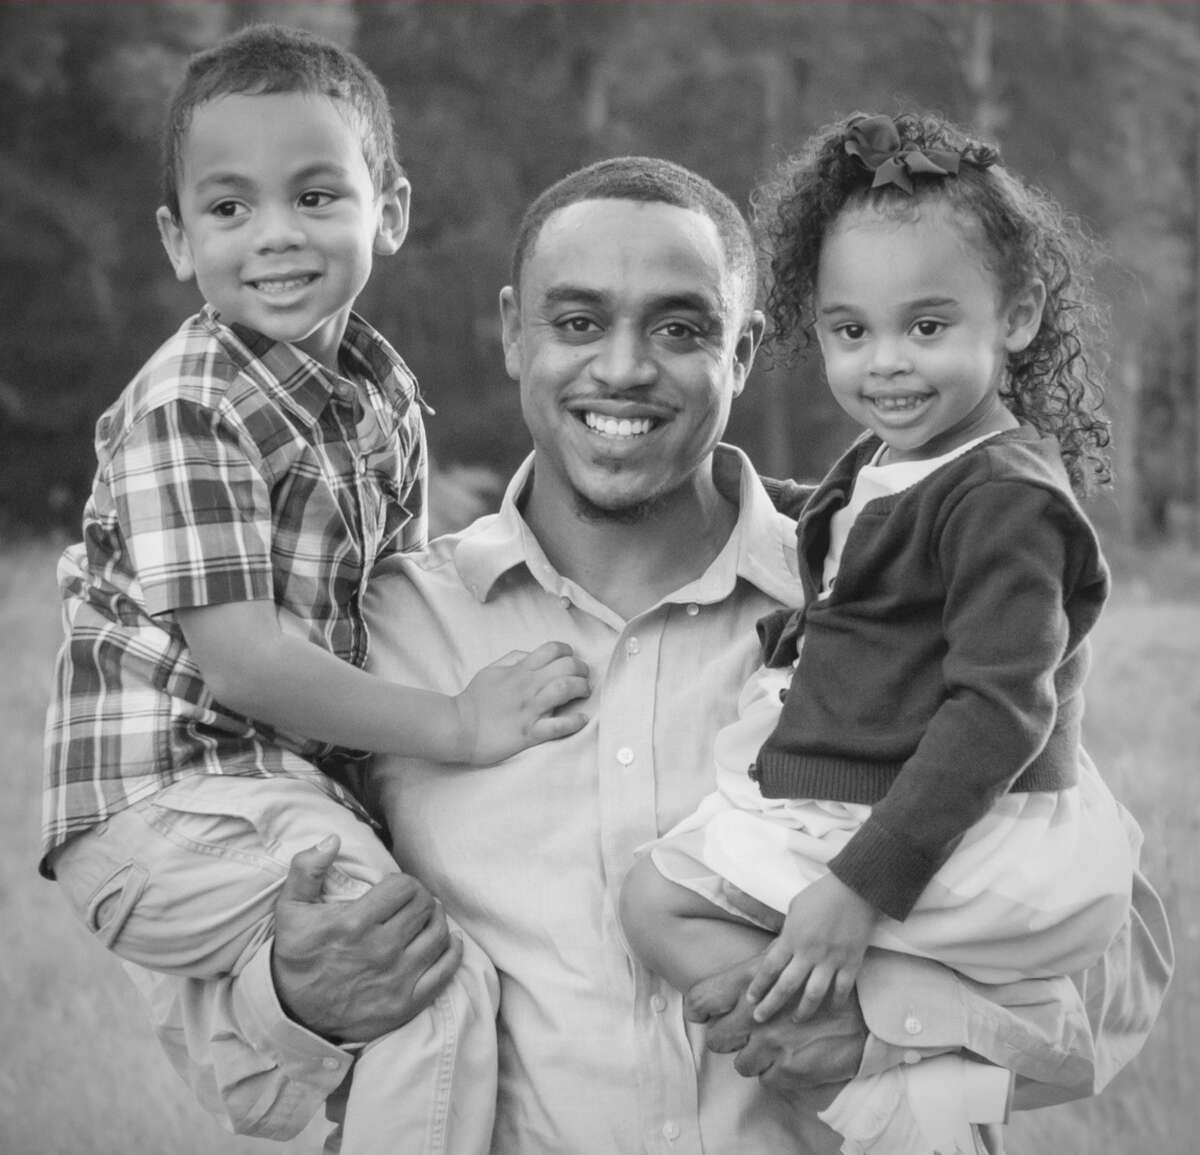 Tillman Givens III, a businessman and founder of Phenomenal Dads, with his son, Tillman IV, 6, and daughter, Aubrey, 4